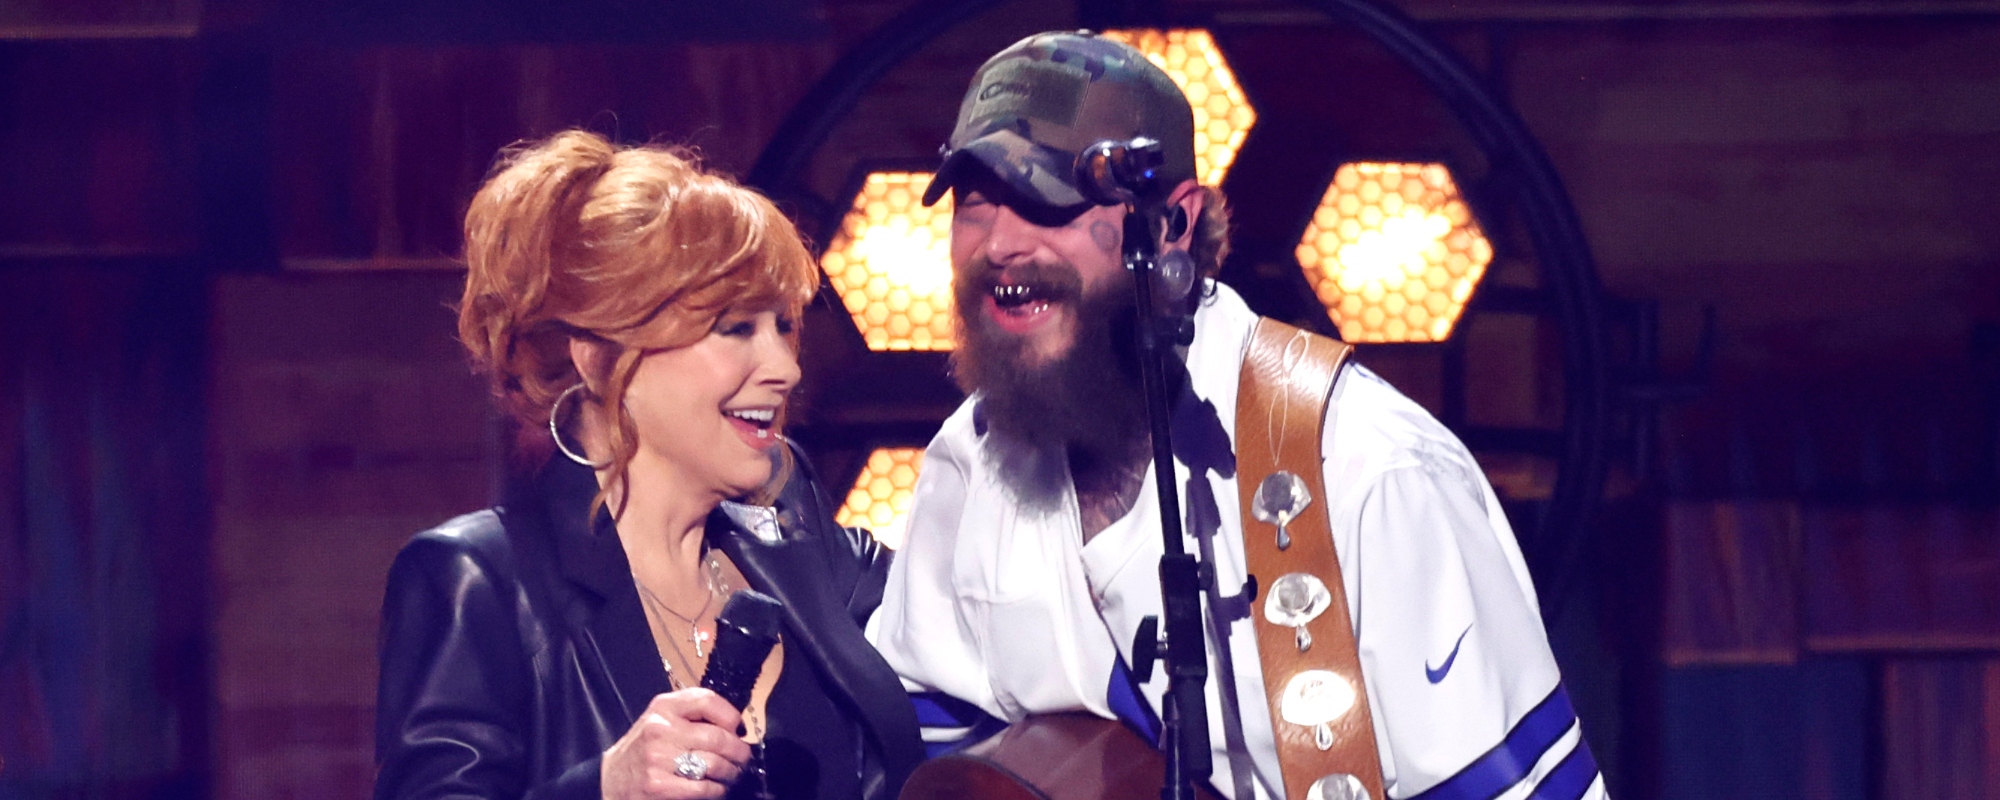 Reba McEntire Shouts Out Post Malone for Their Surprise Dickey Betts Duet at the ACM Awards